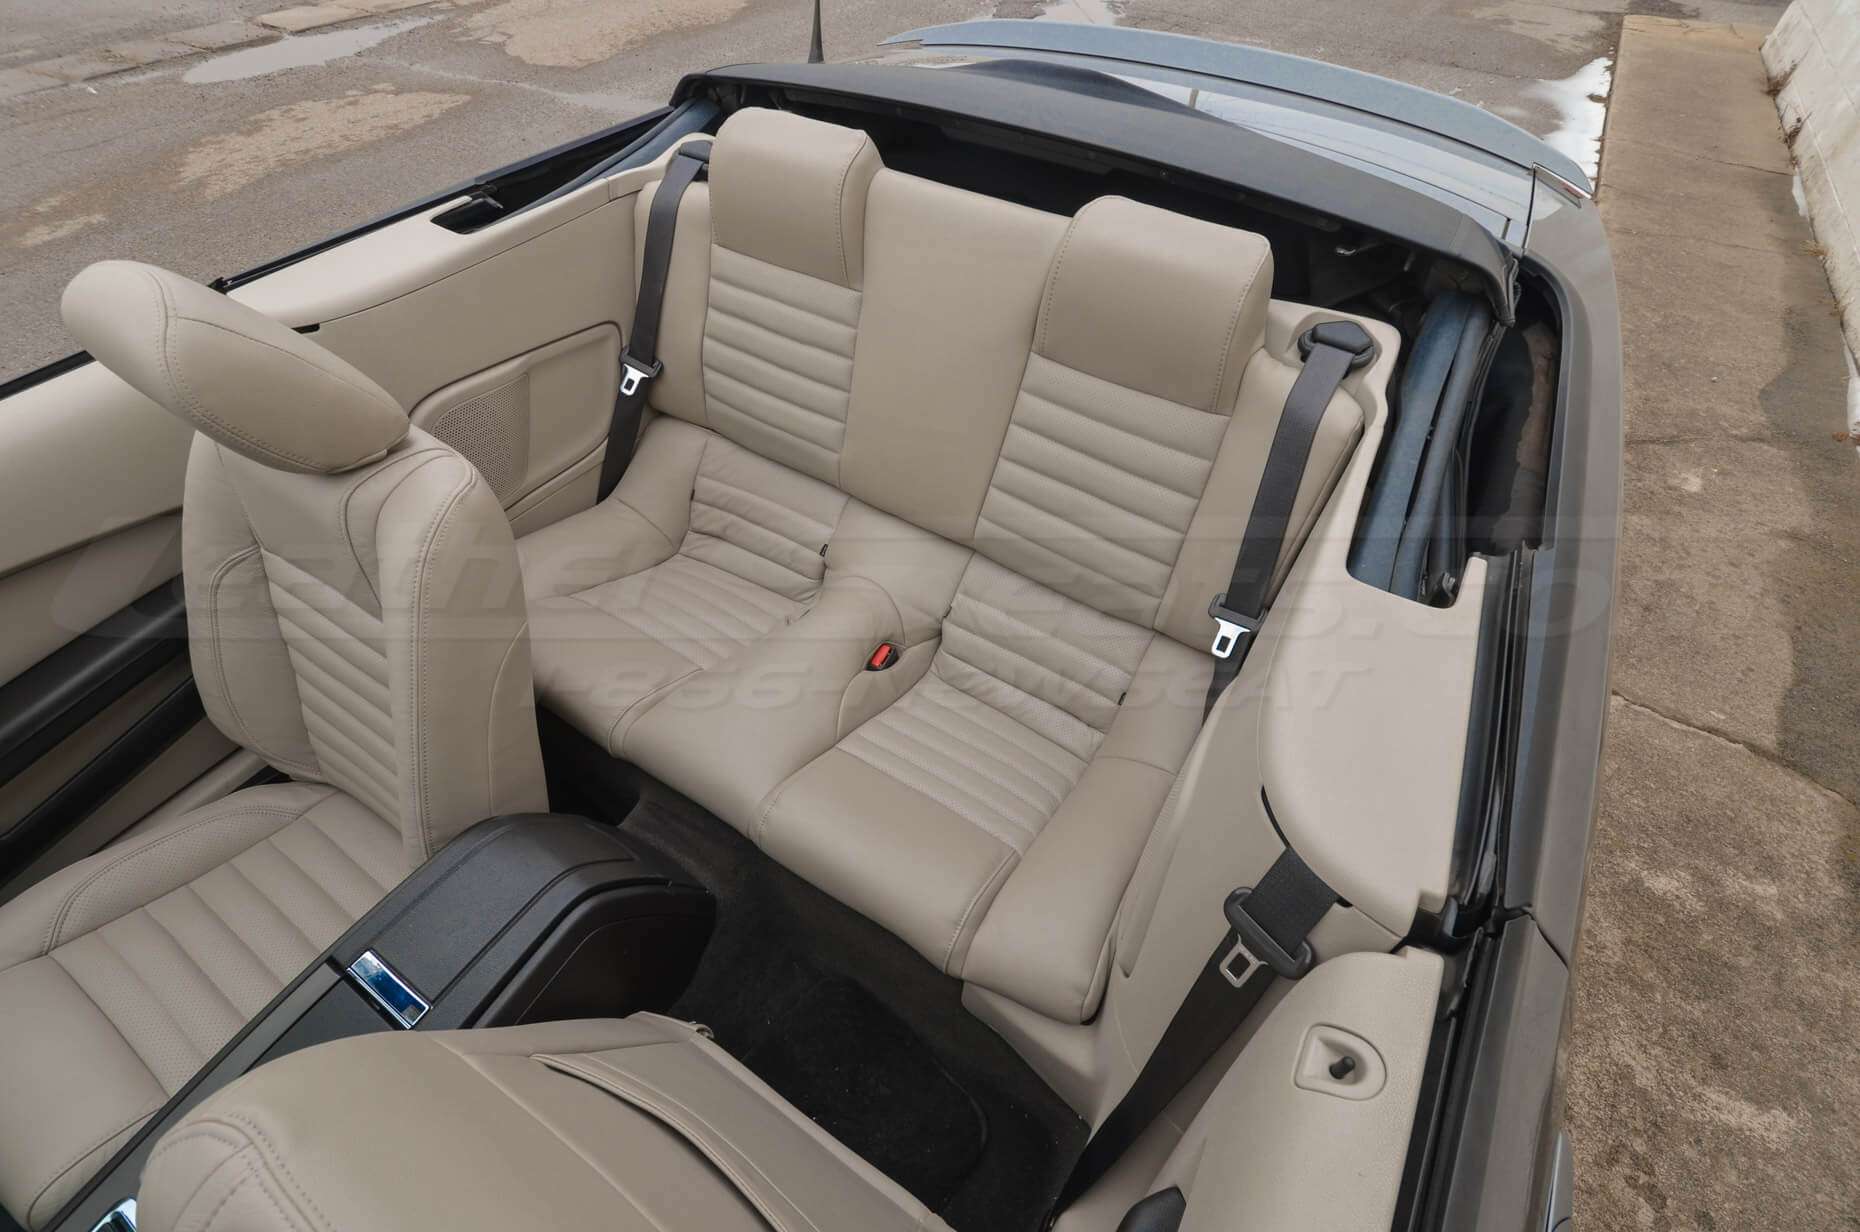 Ford Mustang Convertible rear leather seats with no headrest